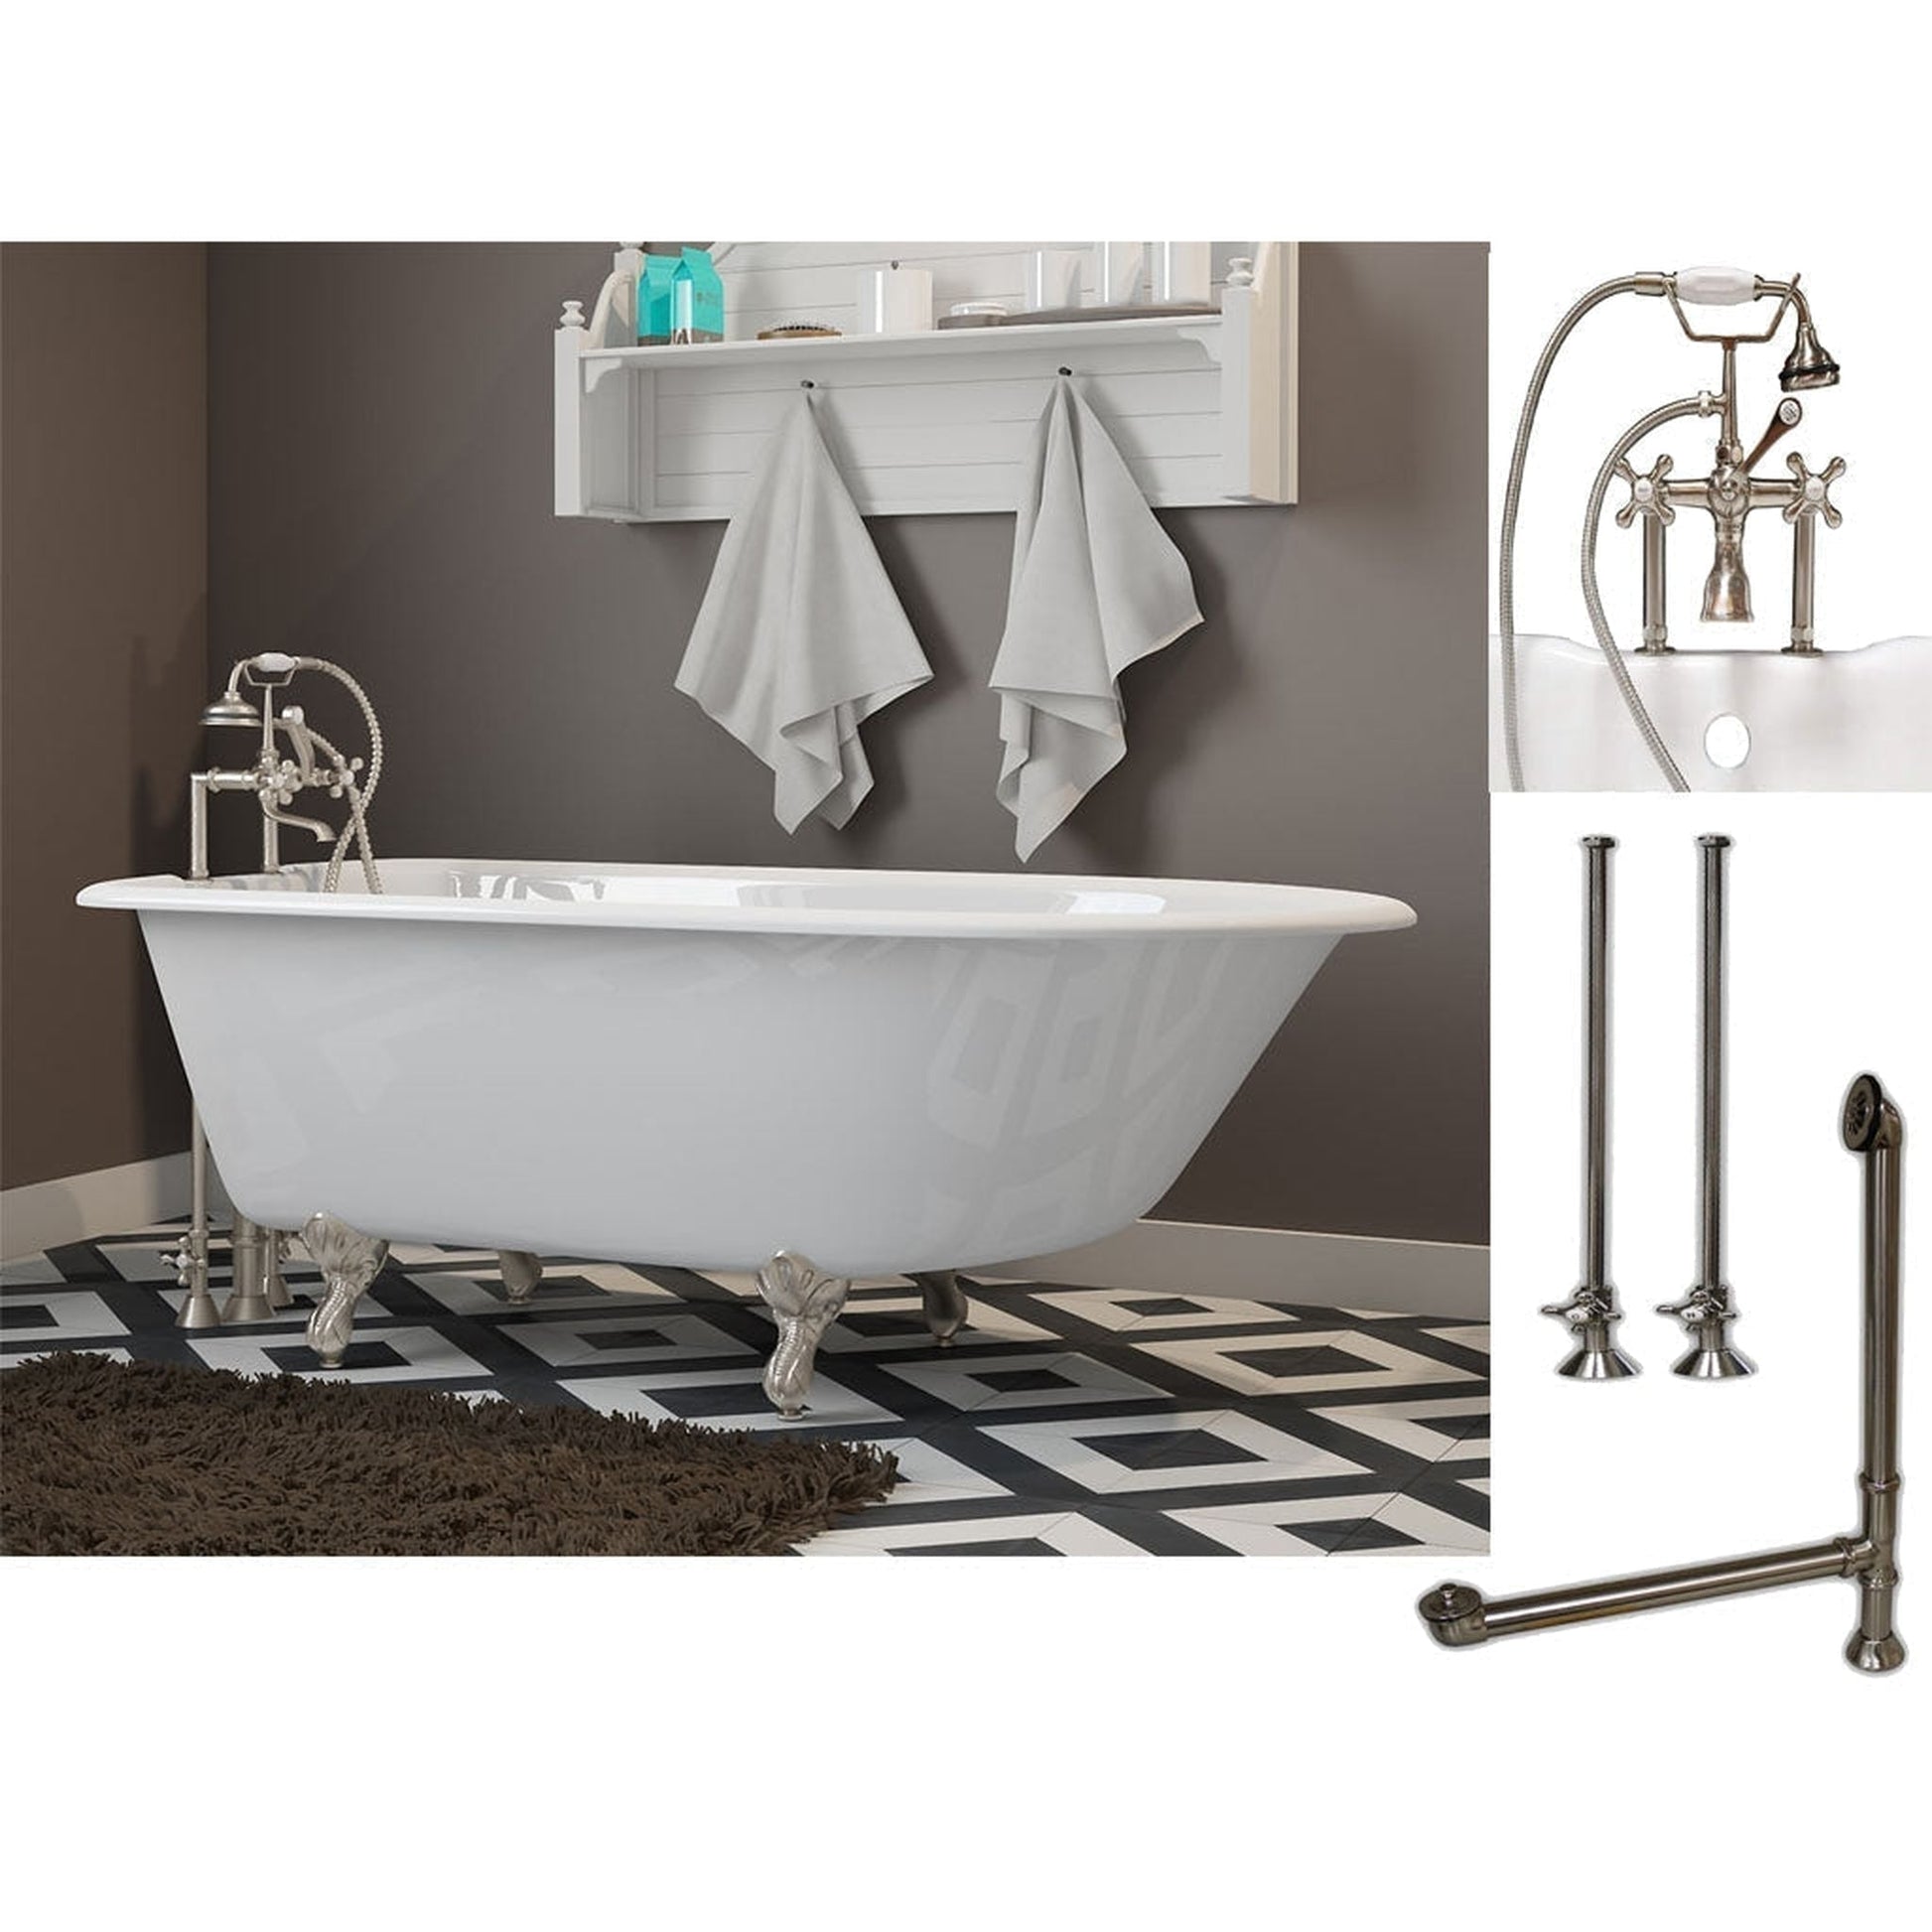 Cambridge Plumbing 54" White Cast Iron Rolled Rim Clawfoot Bathtub With Deck Holes And Complete Plumbing Package Including 6” Riser Deck Mount Faucet, Supply Lines, Drain And Overflow Assembly In Brushed Nickel